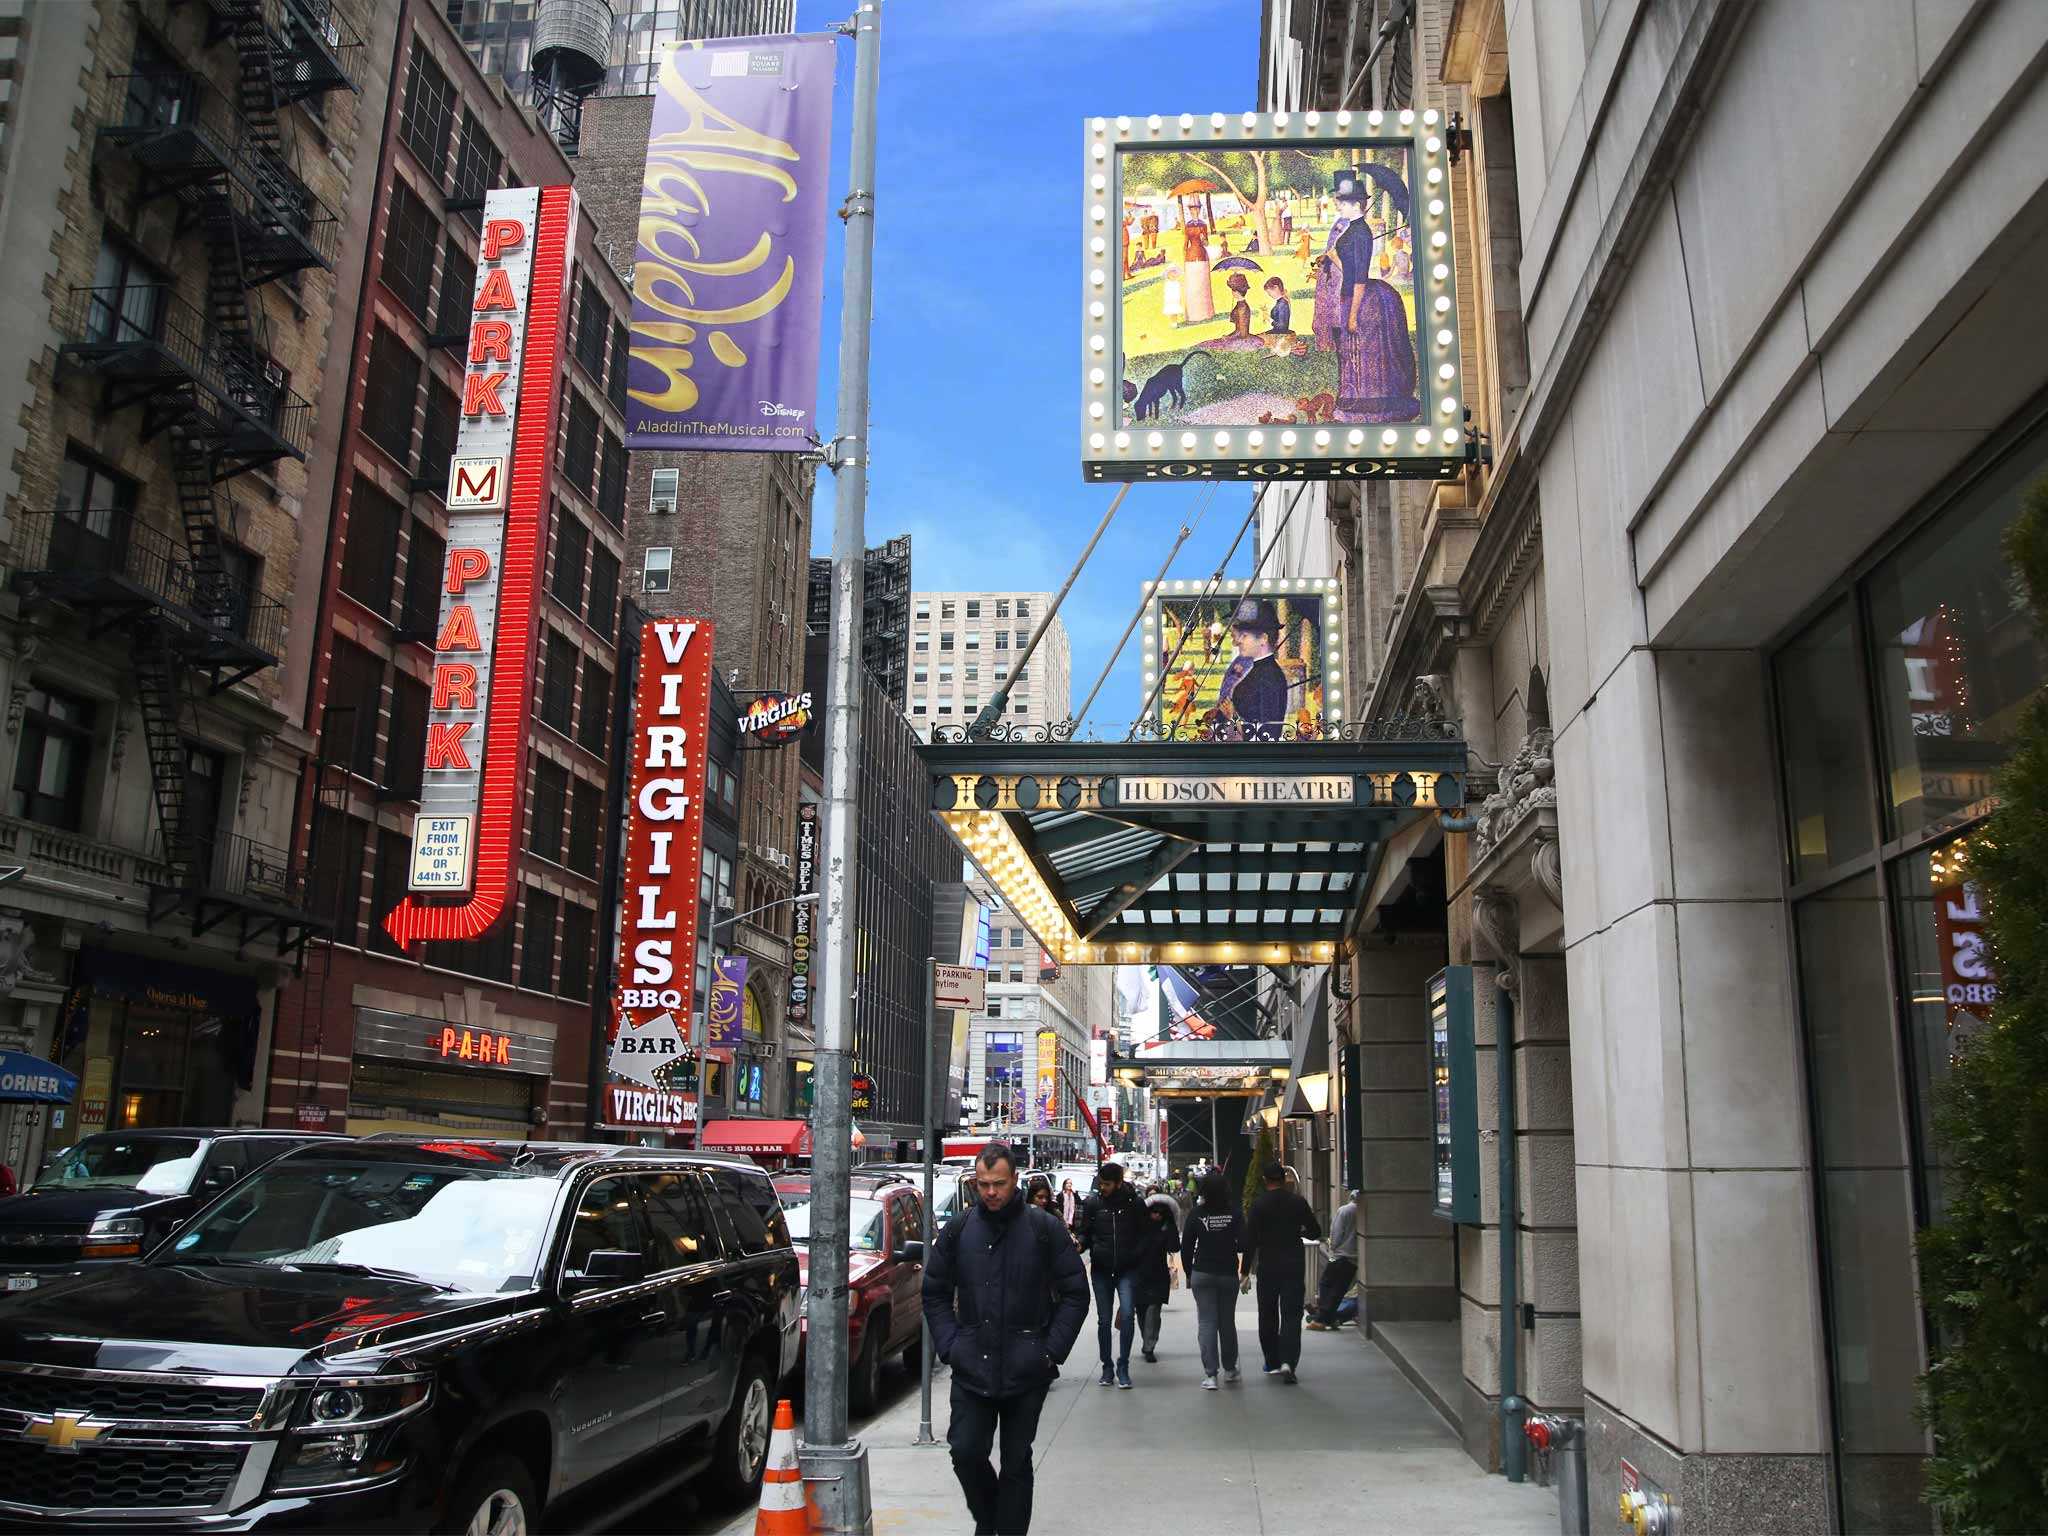 Hudson Theatre on Broadway in NYC